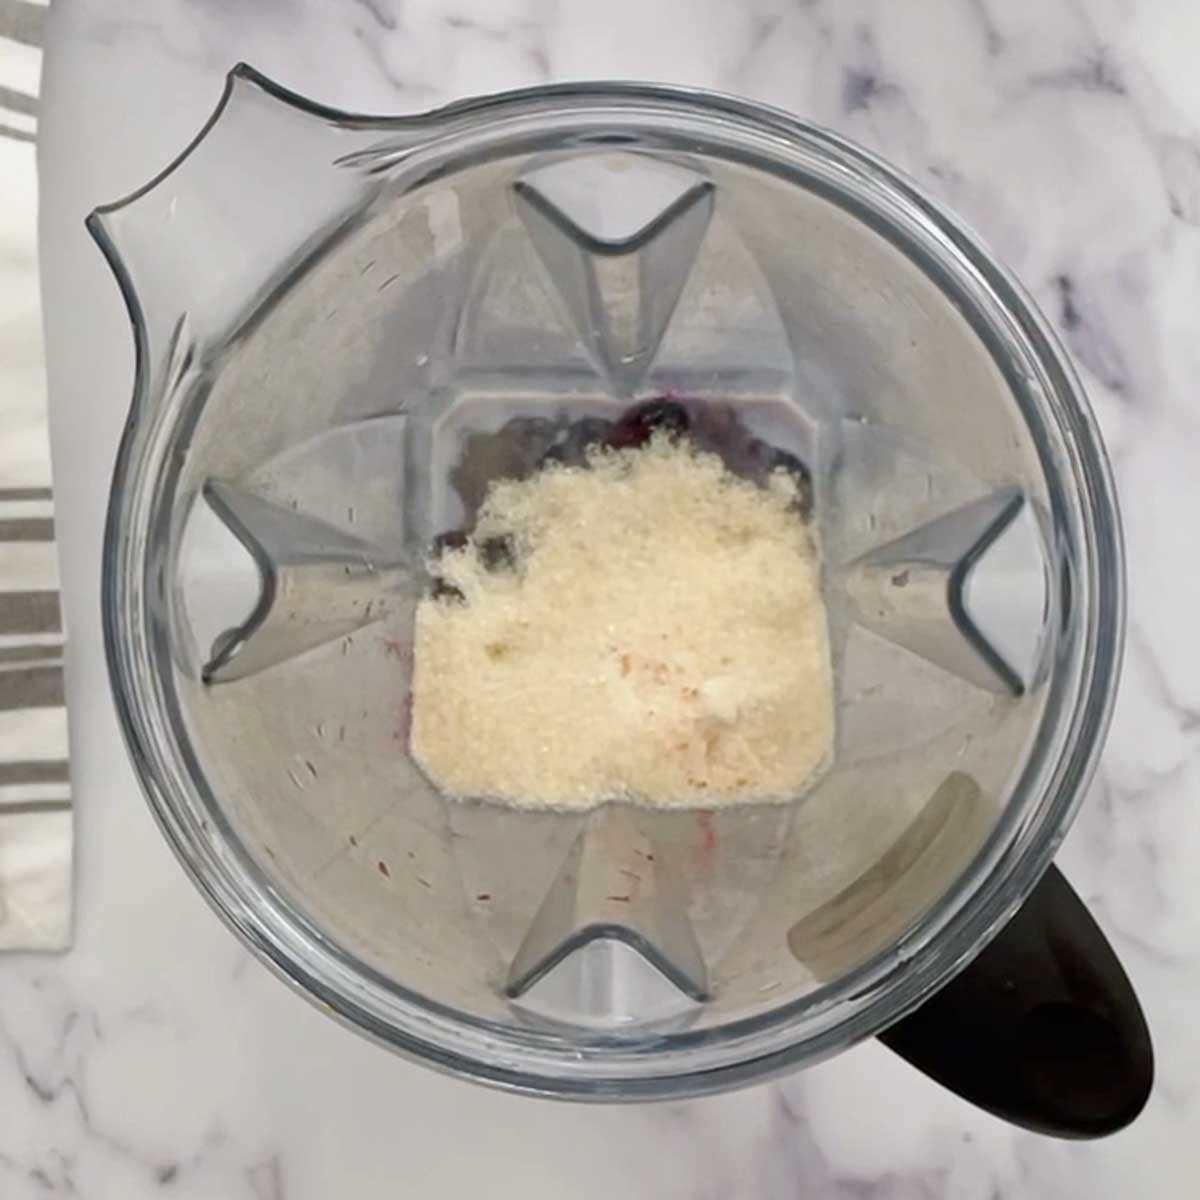 Blueberry ice cream ingredients in a blender.